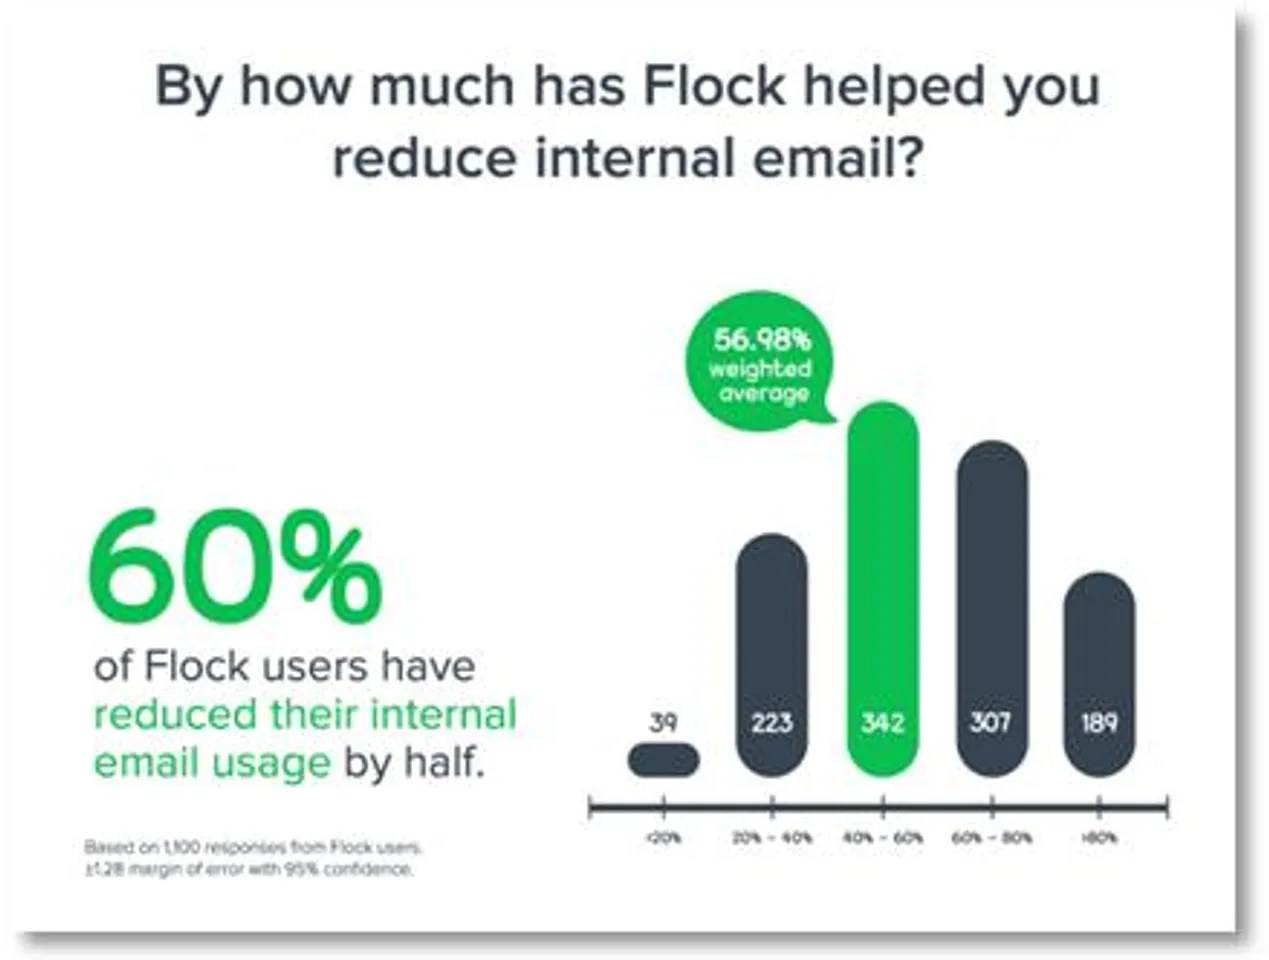 How Flock, an enterprise messaging app, helped reduce email usage by 60%